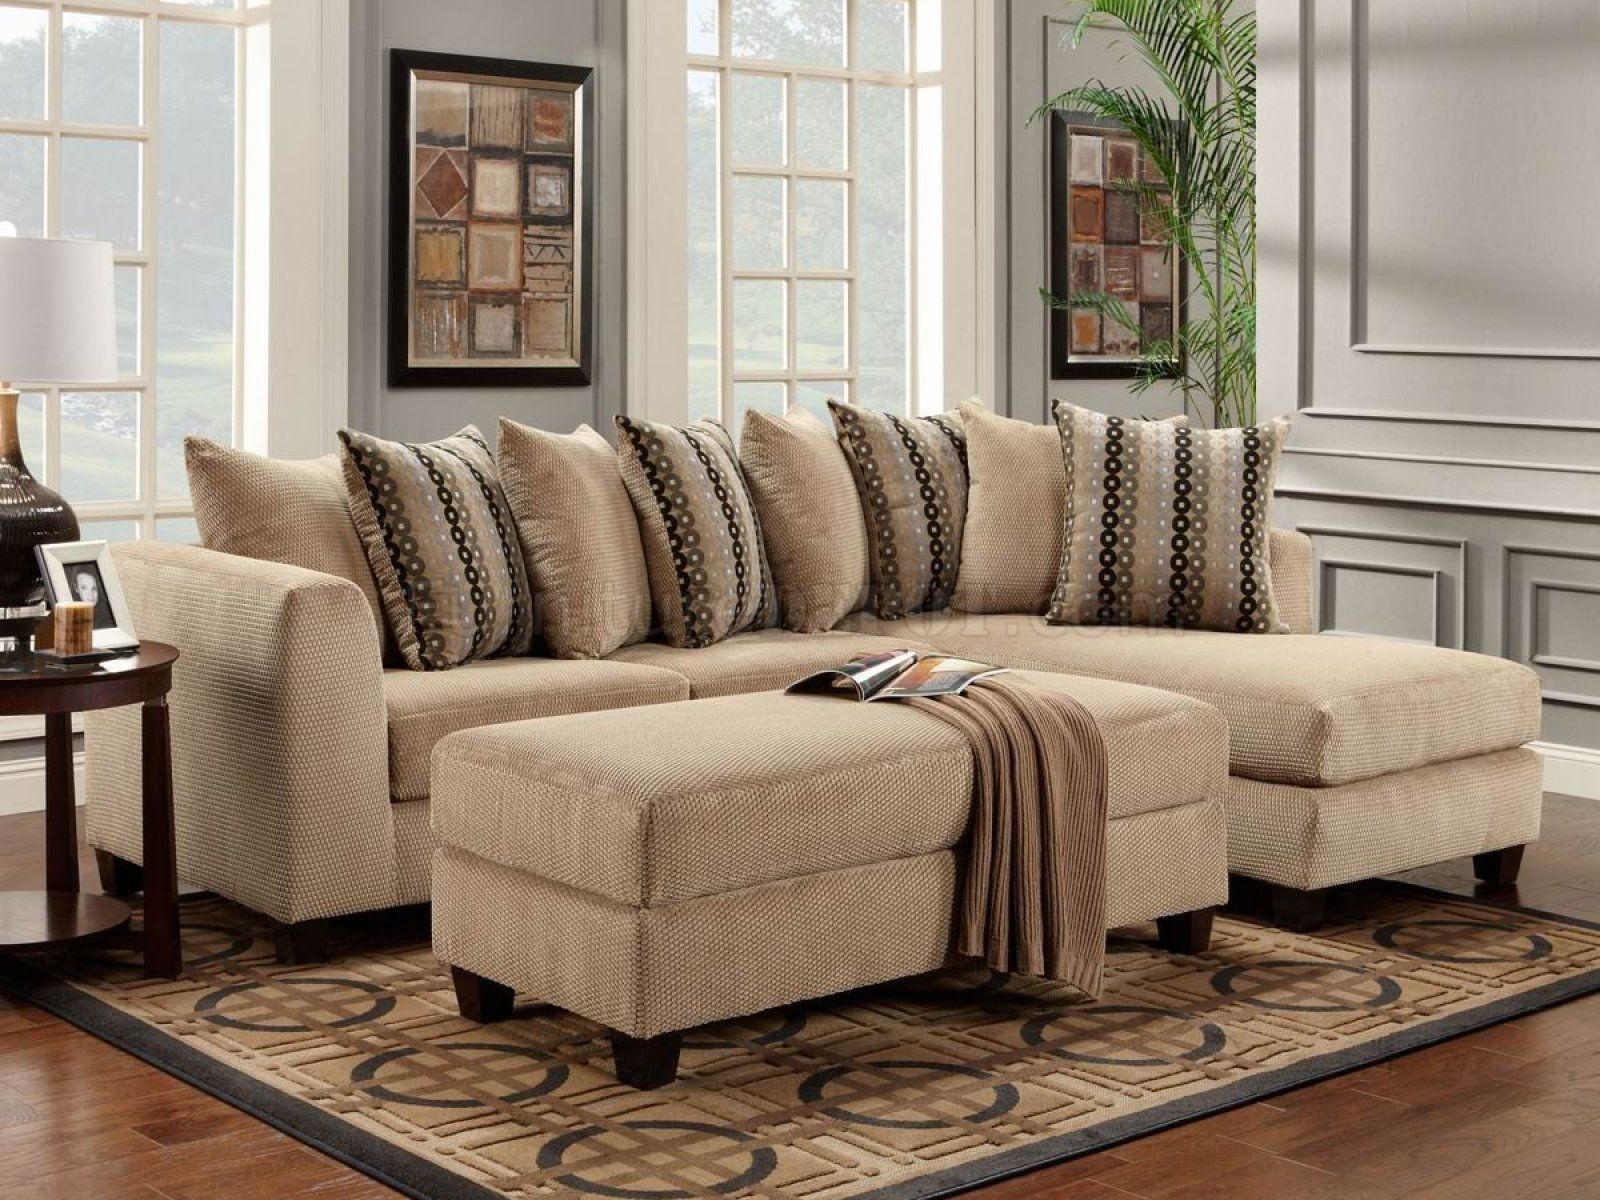 Inspiring Sofa Elegant Sectional With Talsma Furniture And Picture Pertaining To Grand Rapids Mi Sectional Sofas (Photo 9 of 10)